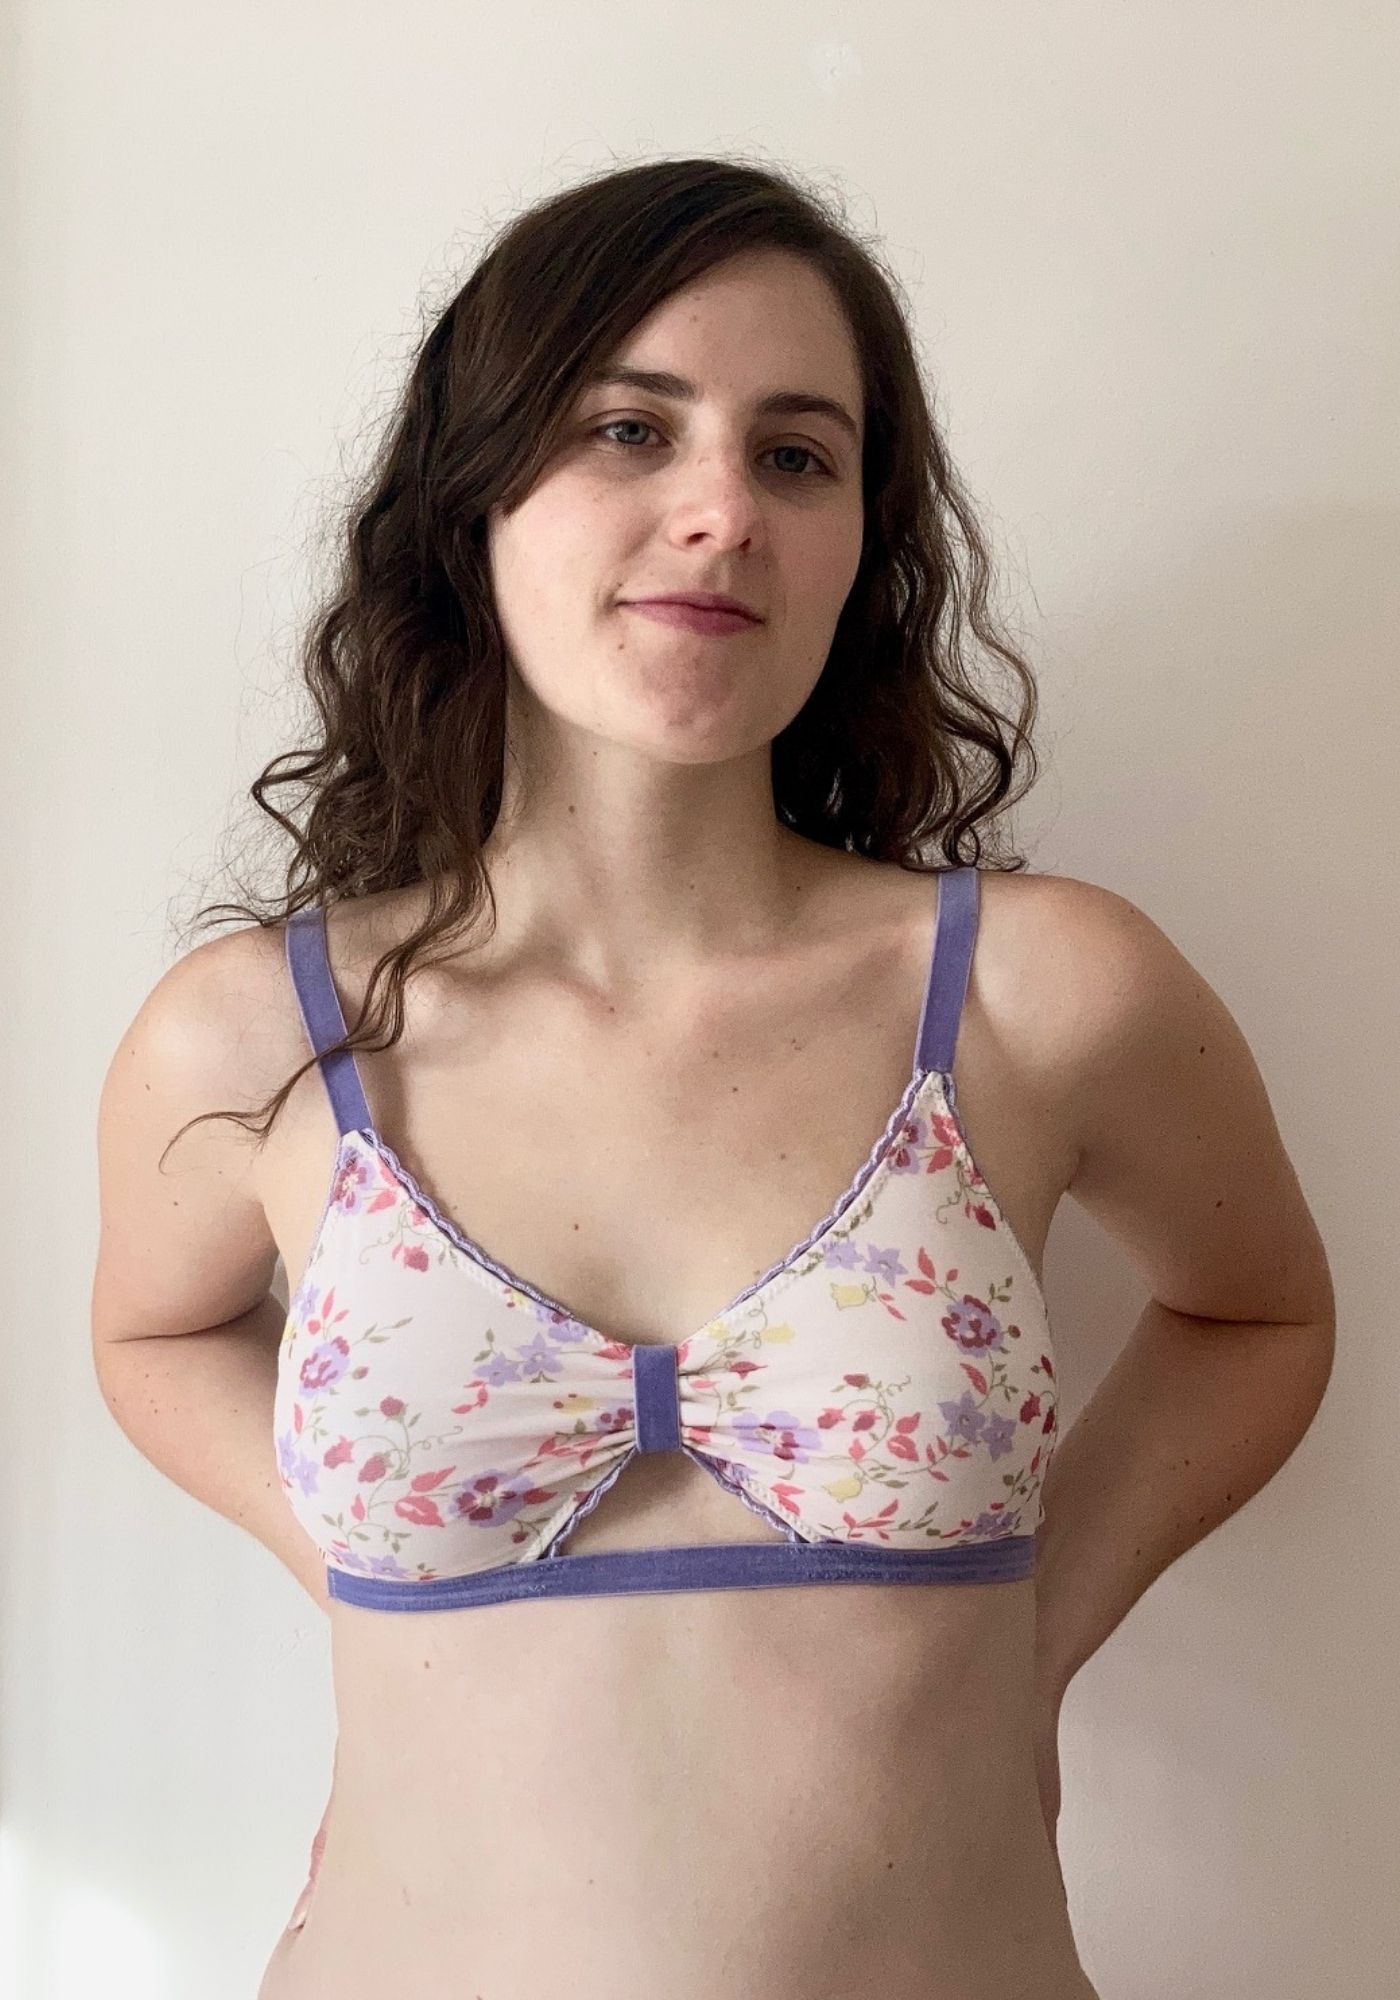 Woman wearing the Barbary Bralette sewing pattern from Sew Projects on The Fold Line. A bra pattern made in jersey, stretch satin, stretch mesh or powernet stretch lace fabrics, featuring a lined front, adjustable straps, wide elastic underband and a keyhole style front.